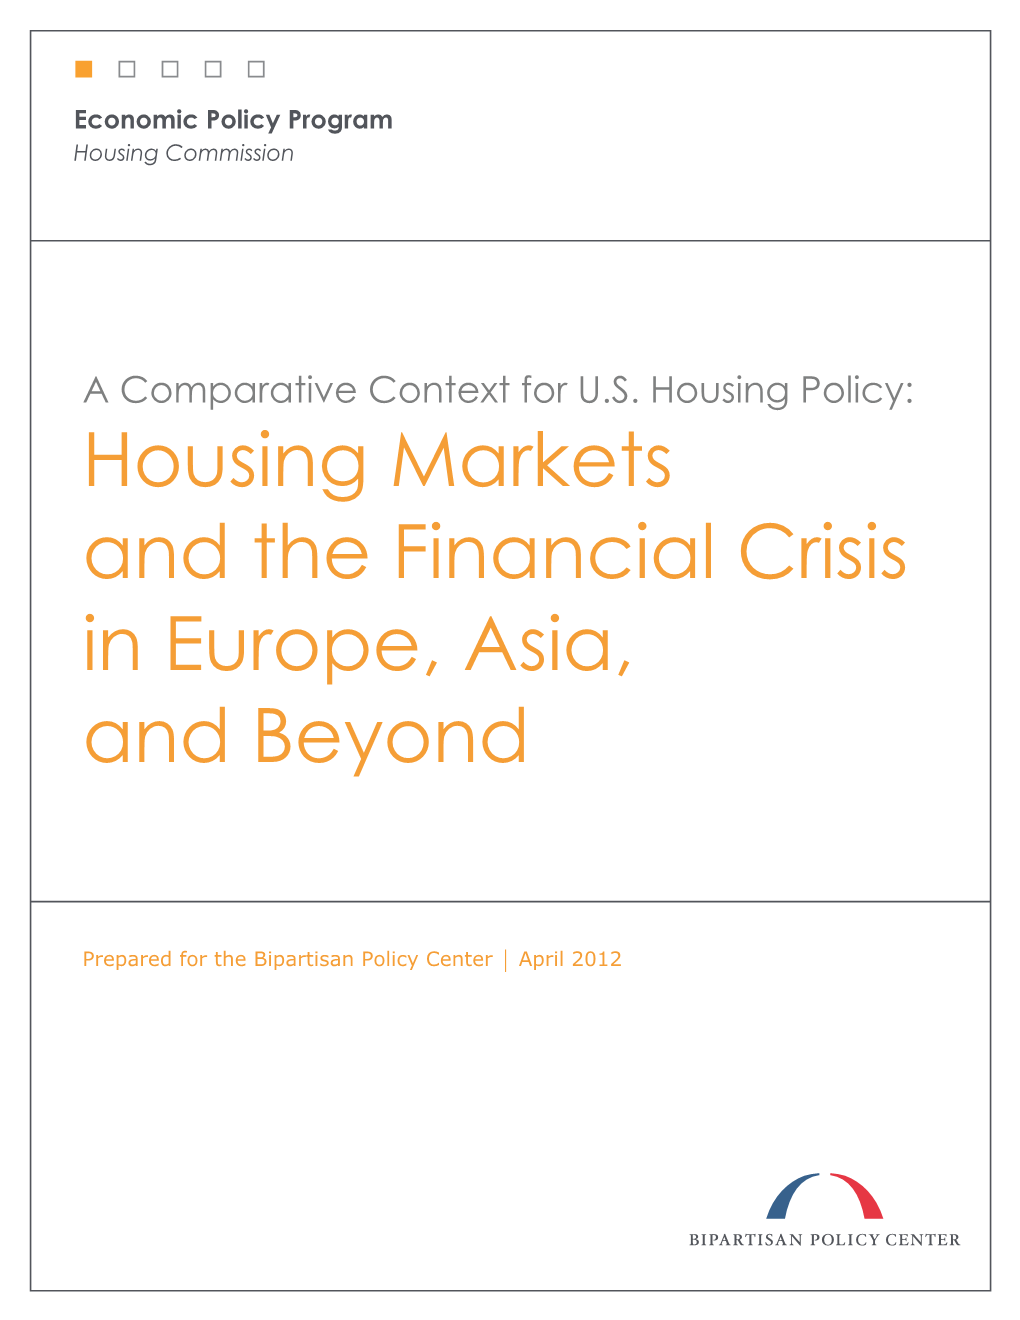 Housing Markets and the Financial Crisis in Europe, Asia, and Beyond